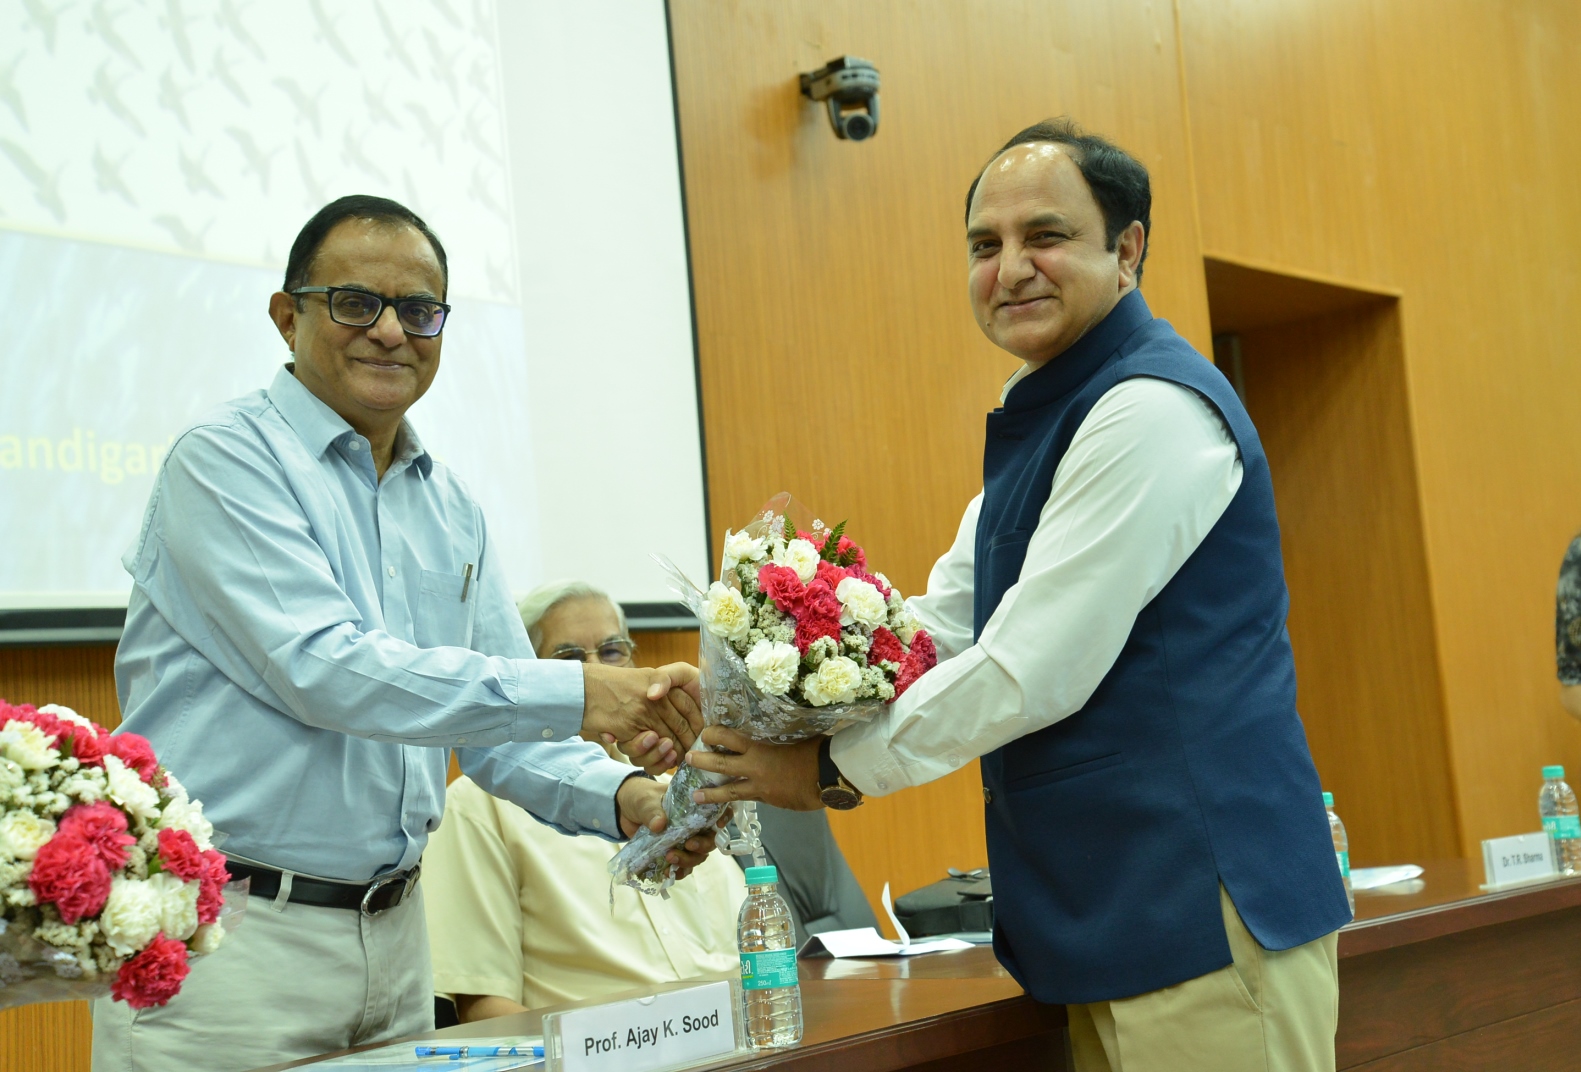 Public Lecture by Prof Ajay K. Sood, President INSA on May 22, 2019